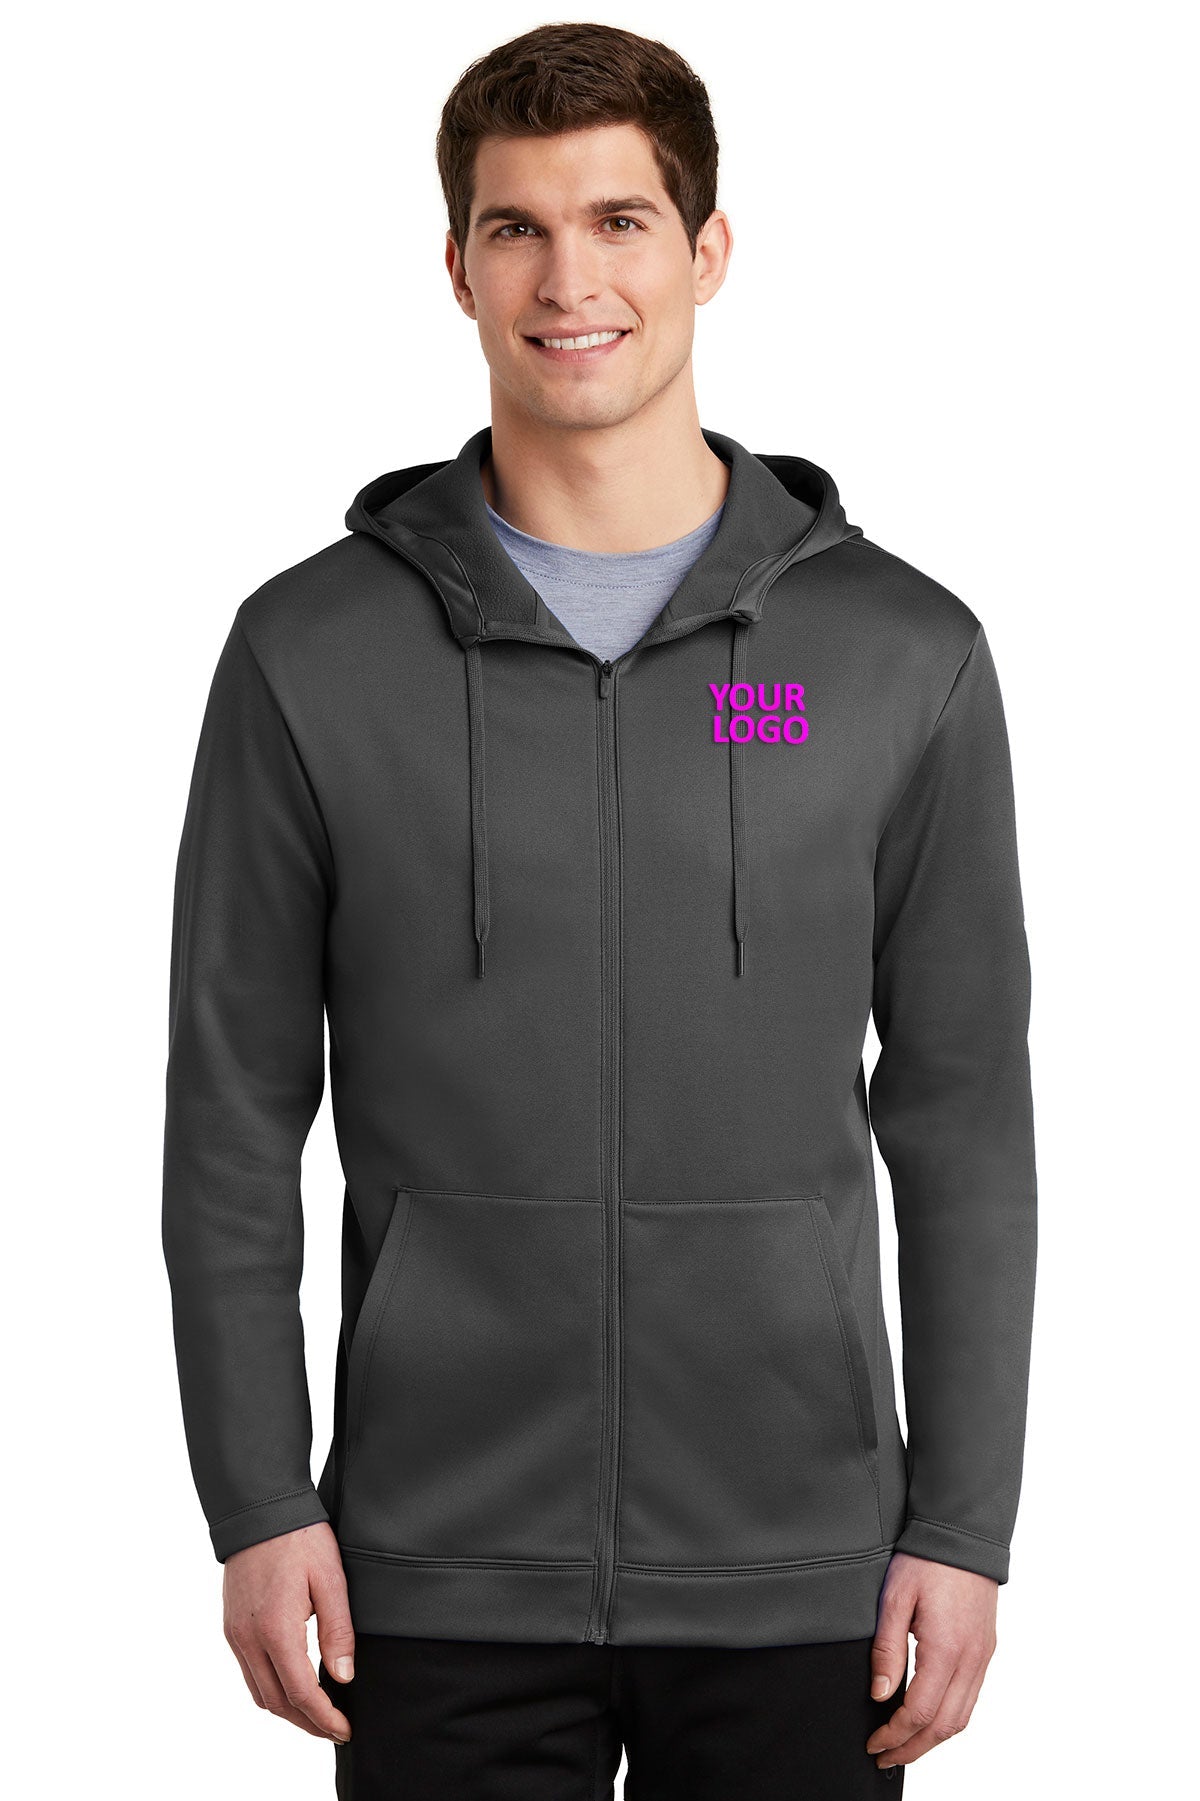 Nike Anthracite NKAH6259 printed sweatshirts for business